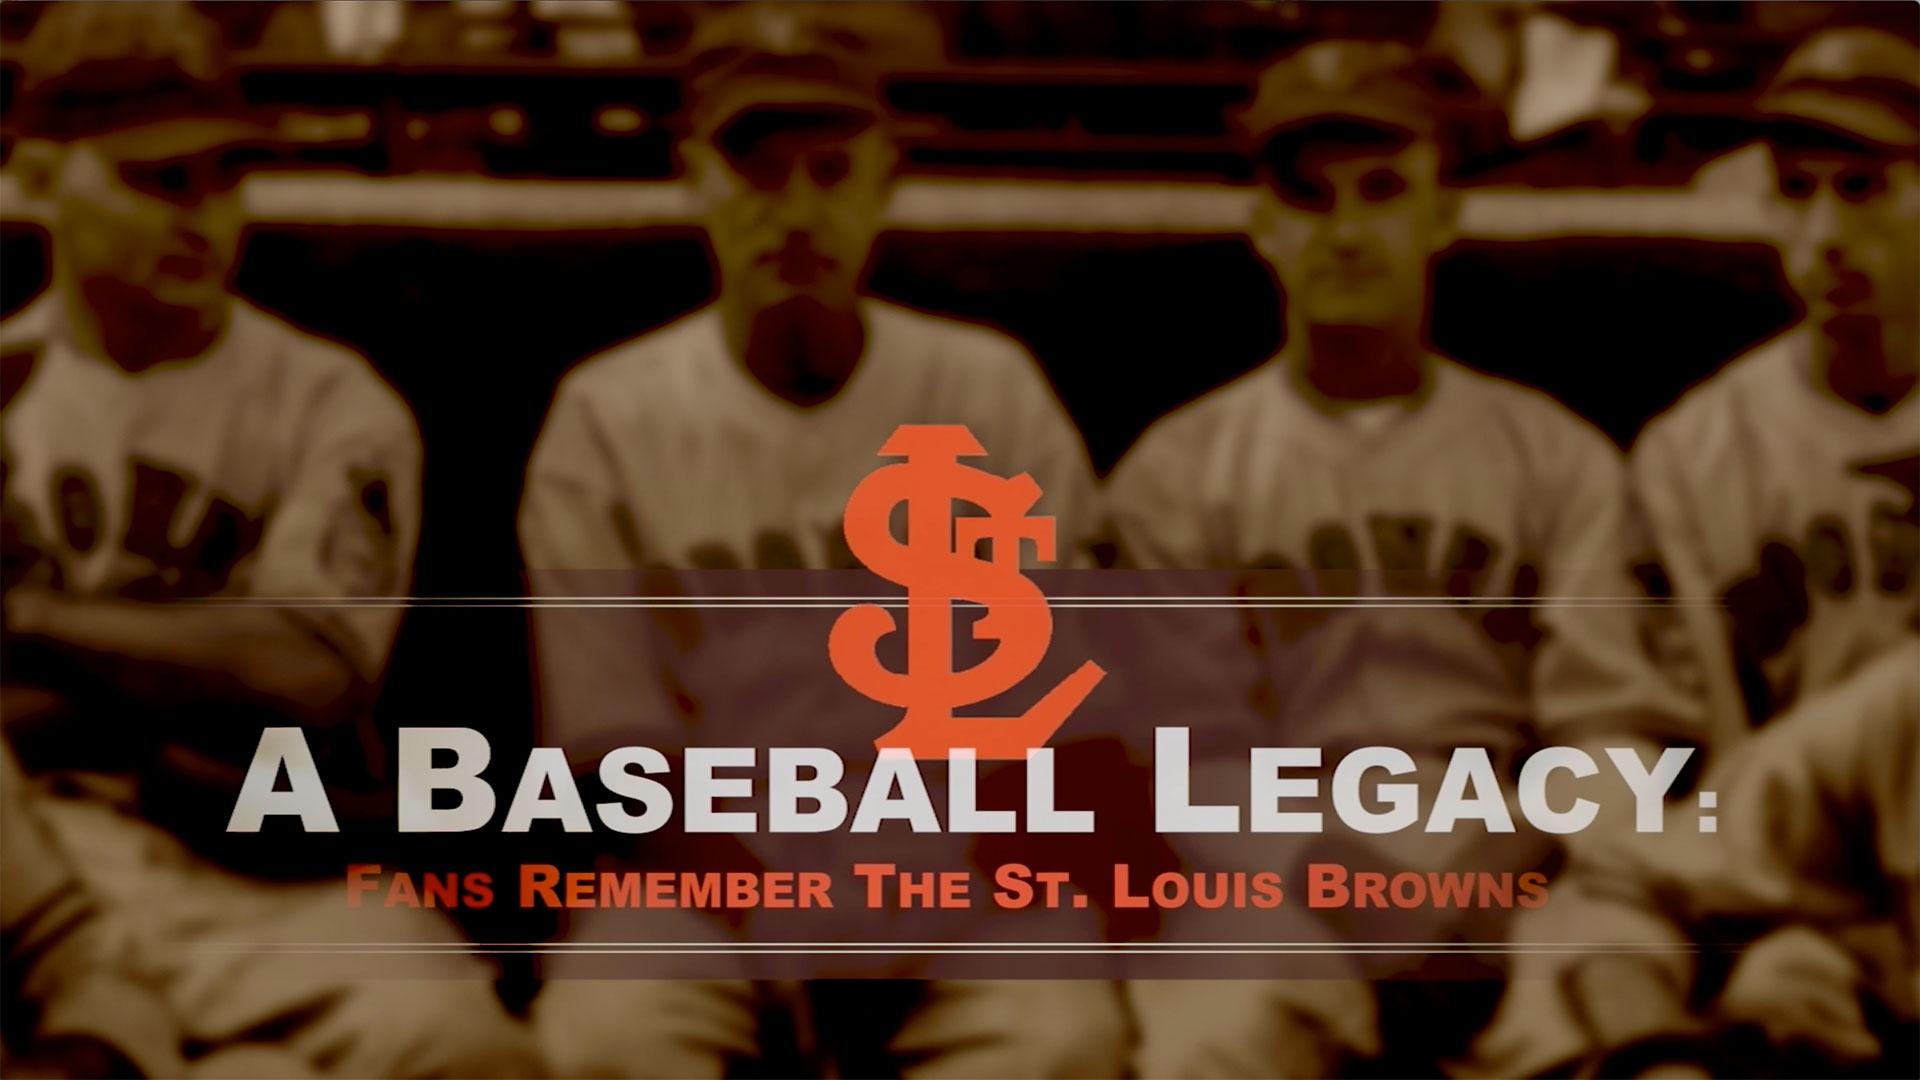 Nine PBS Specials, A Baseball Legacy: Fans Remember the St. Louis Browns, Season 2019, Episode 4